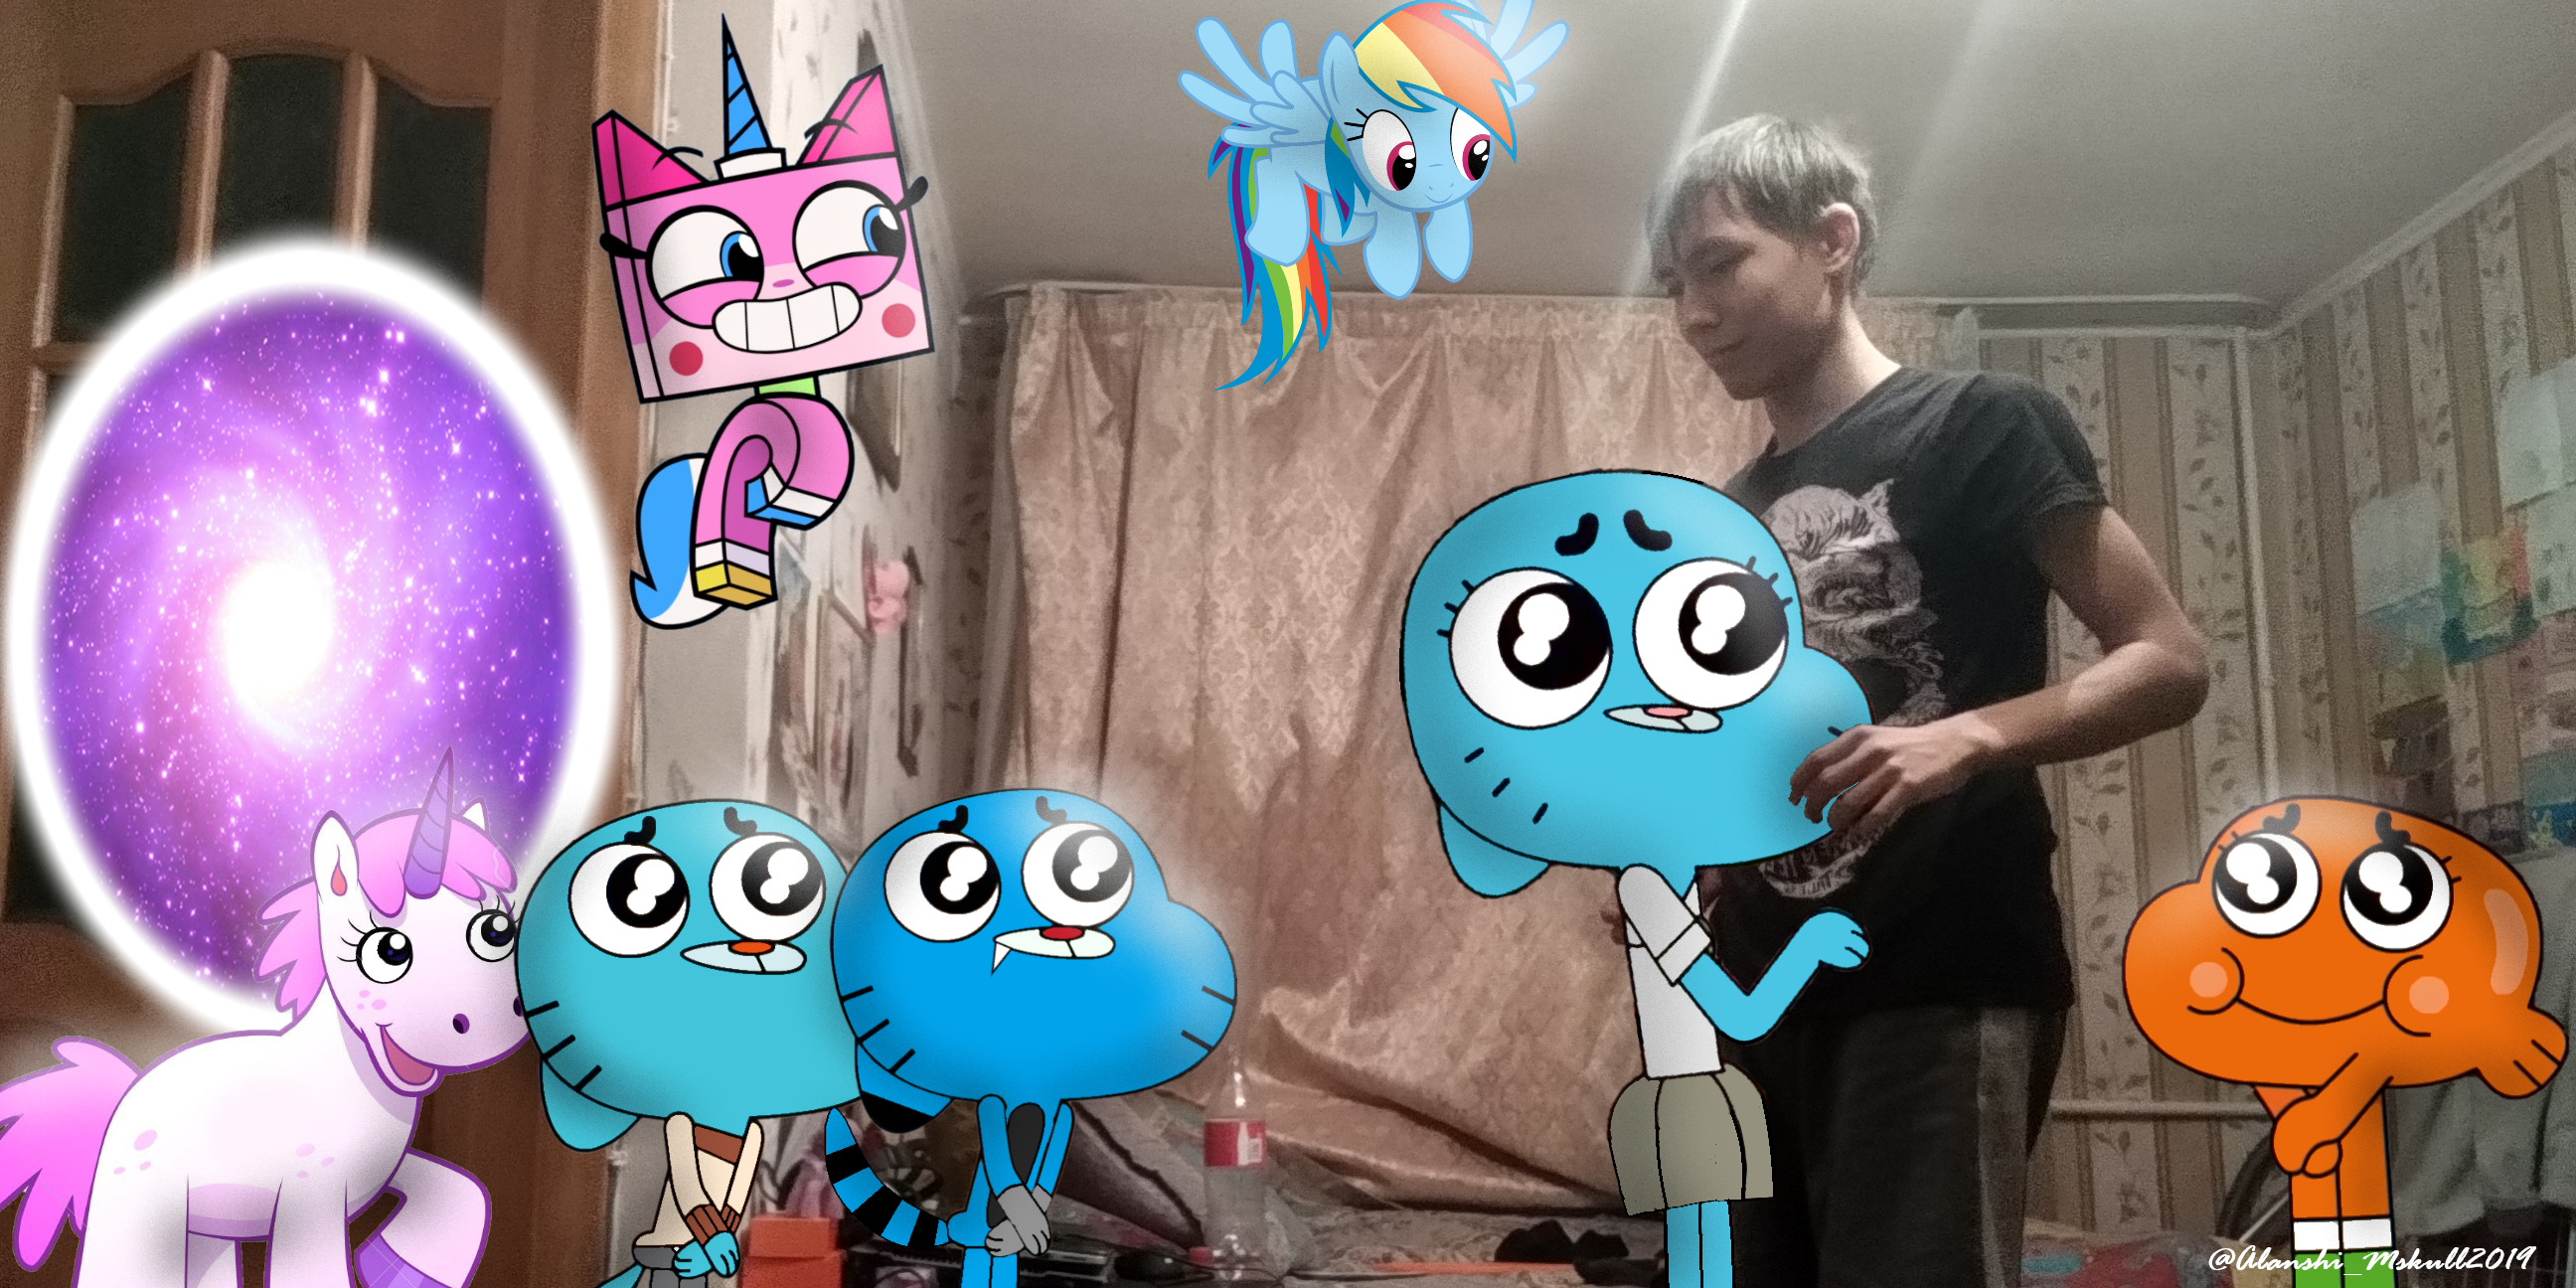 Savia (artist)👩🏽‍🎨🎨 on X: THE GUMBALL HOUSE IS REAL???? https